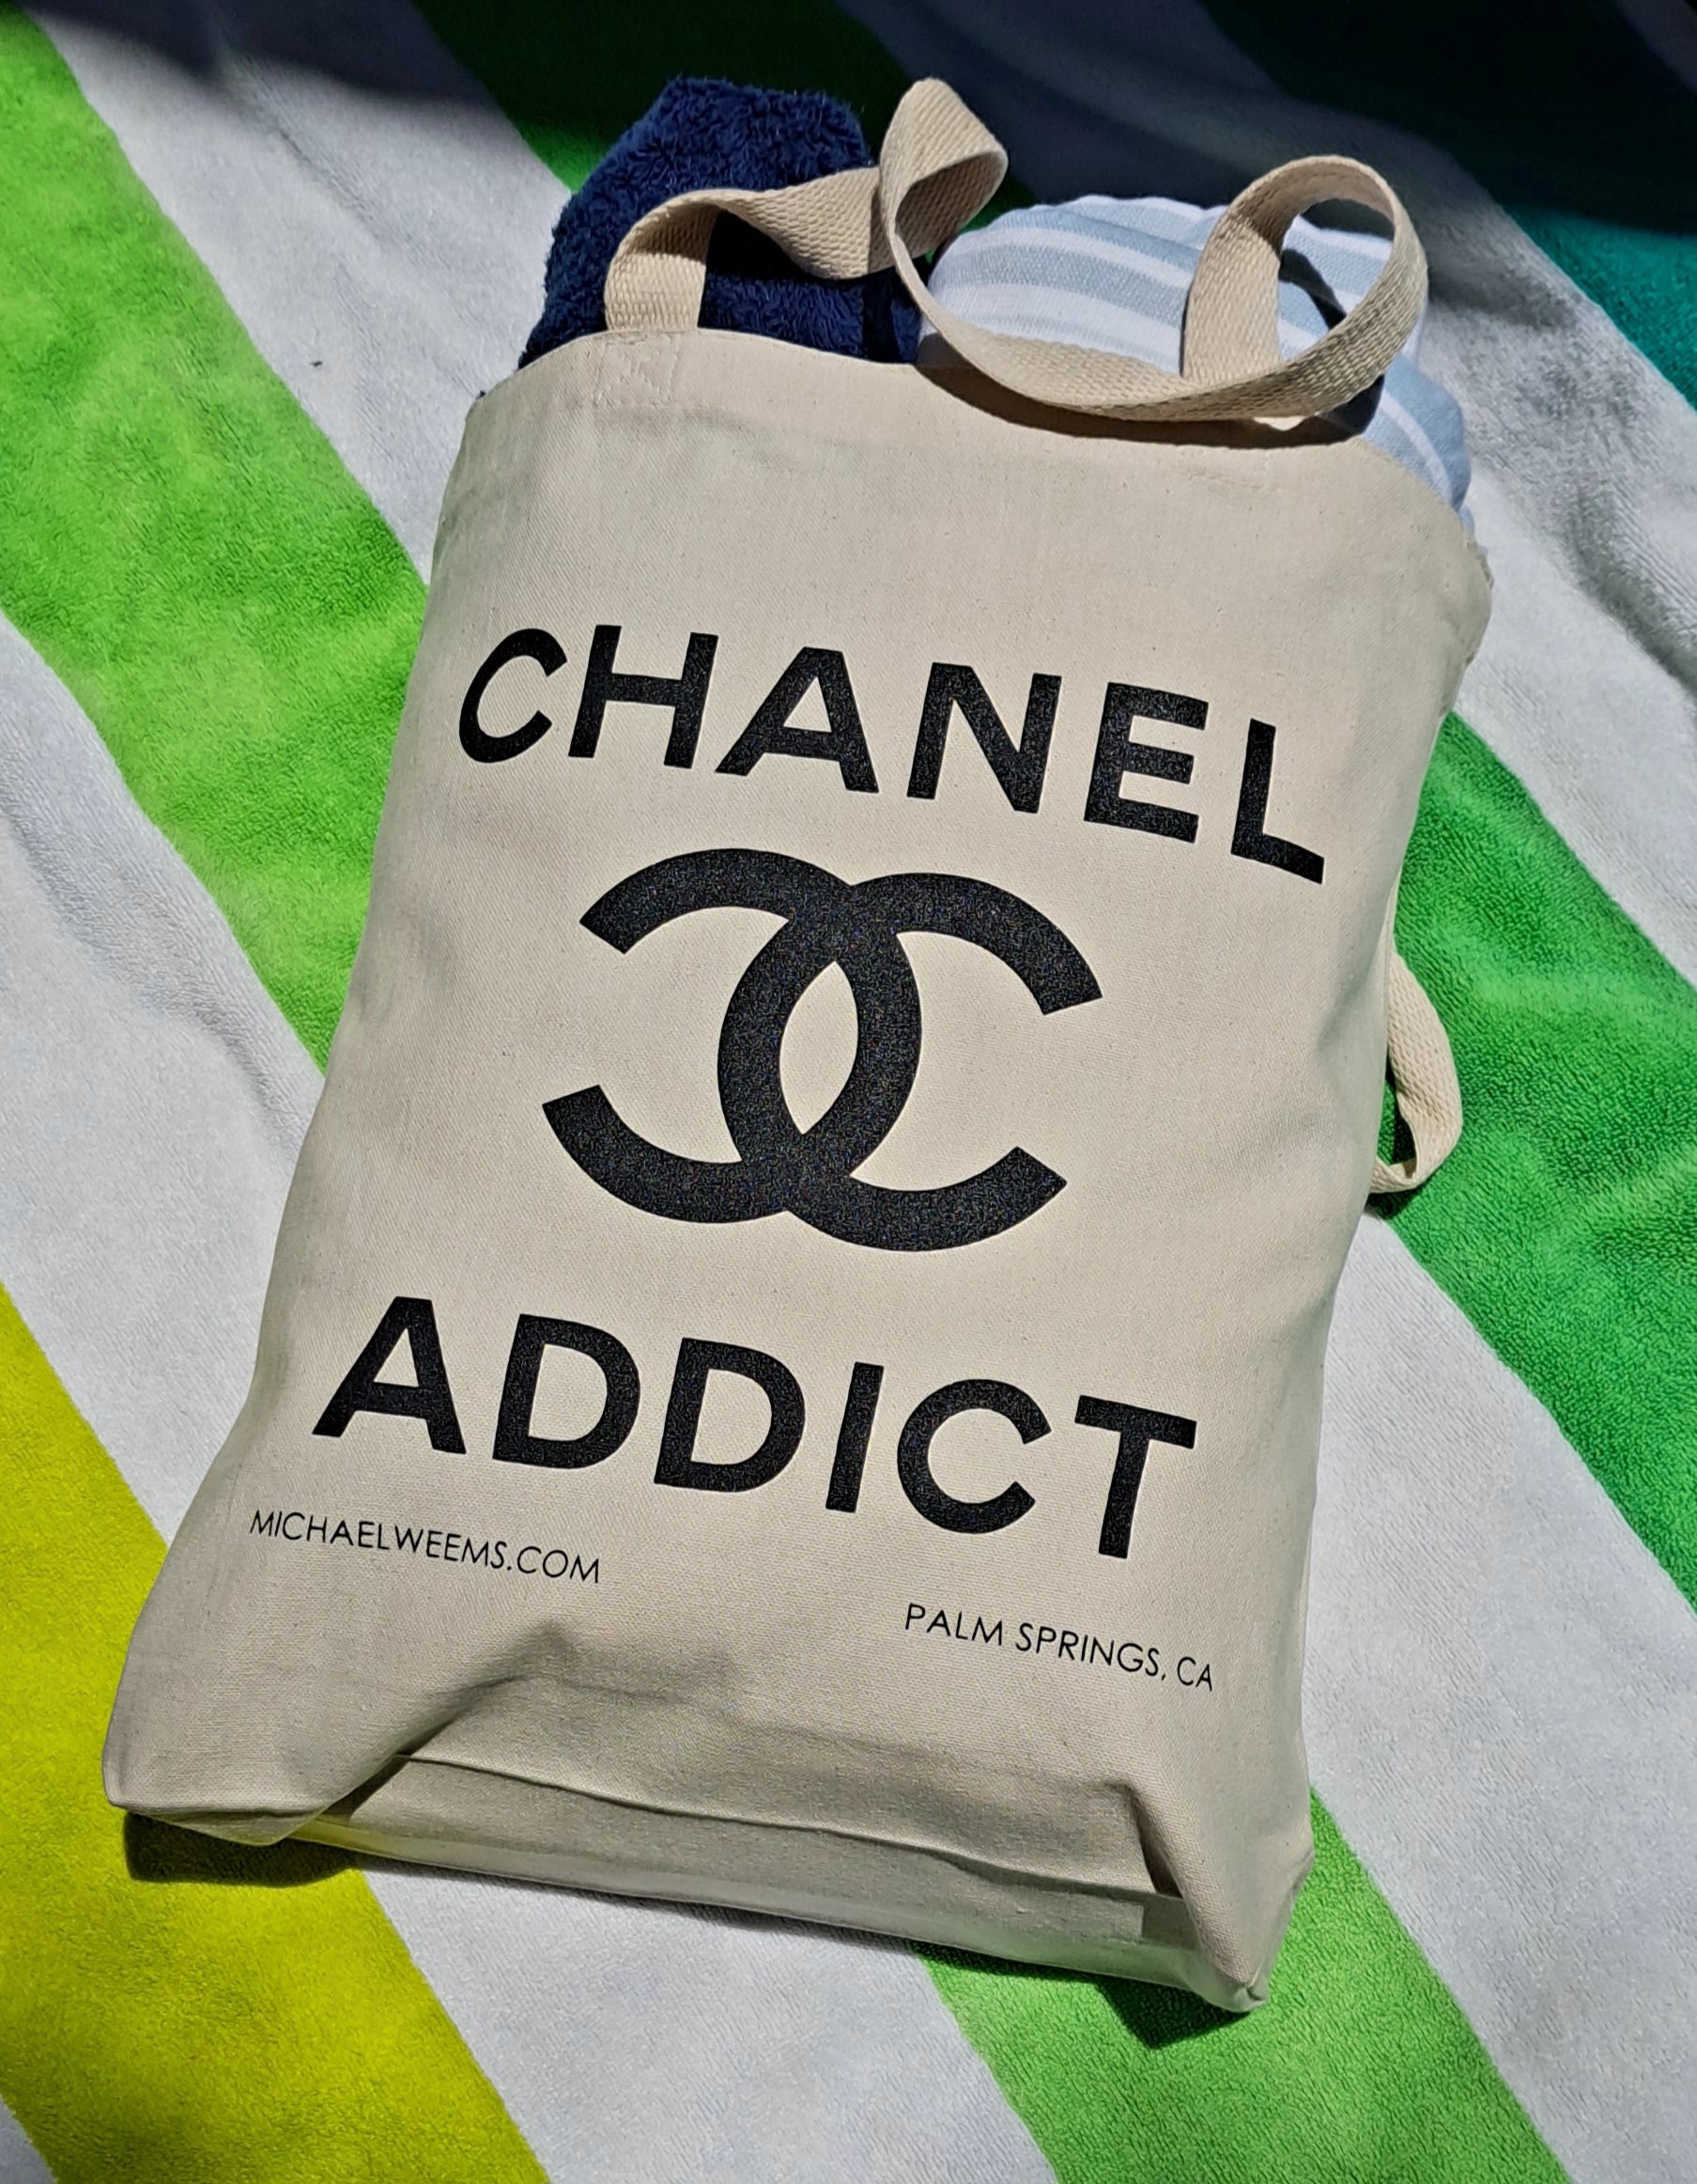 my other bag is chanel tote